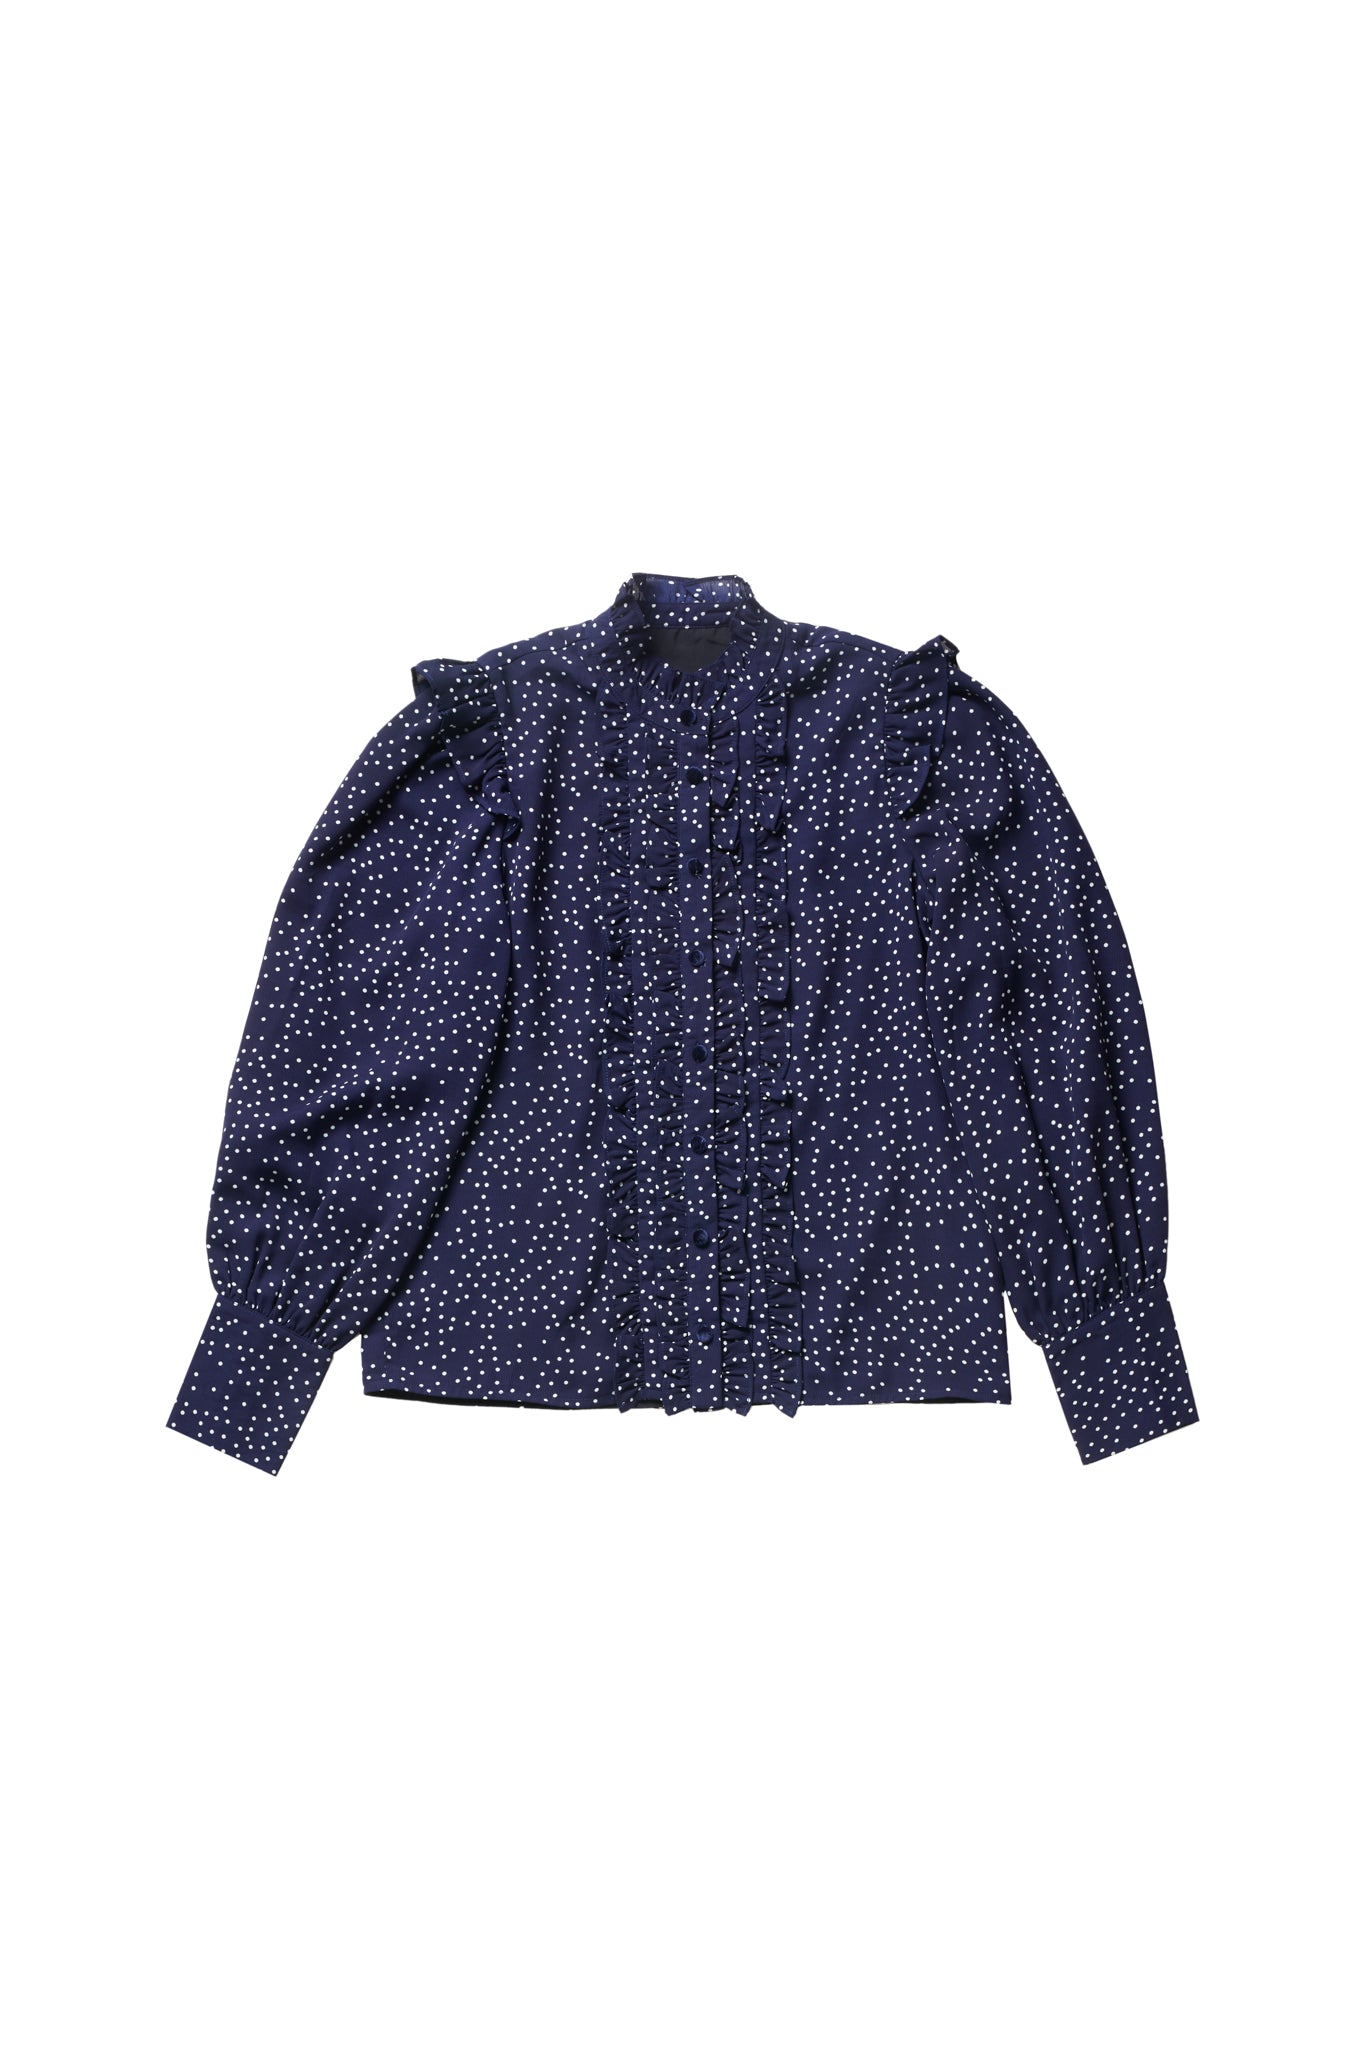 Lisa Blouse in Dots on Navy #6130BPB